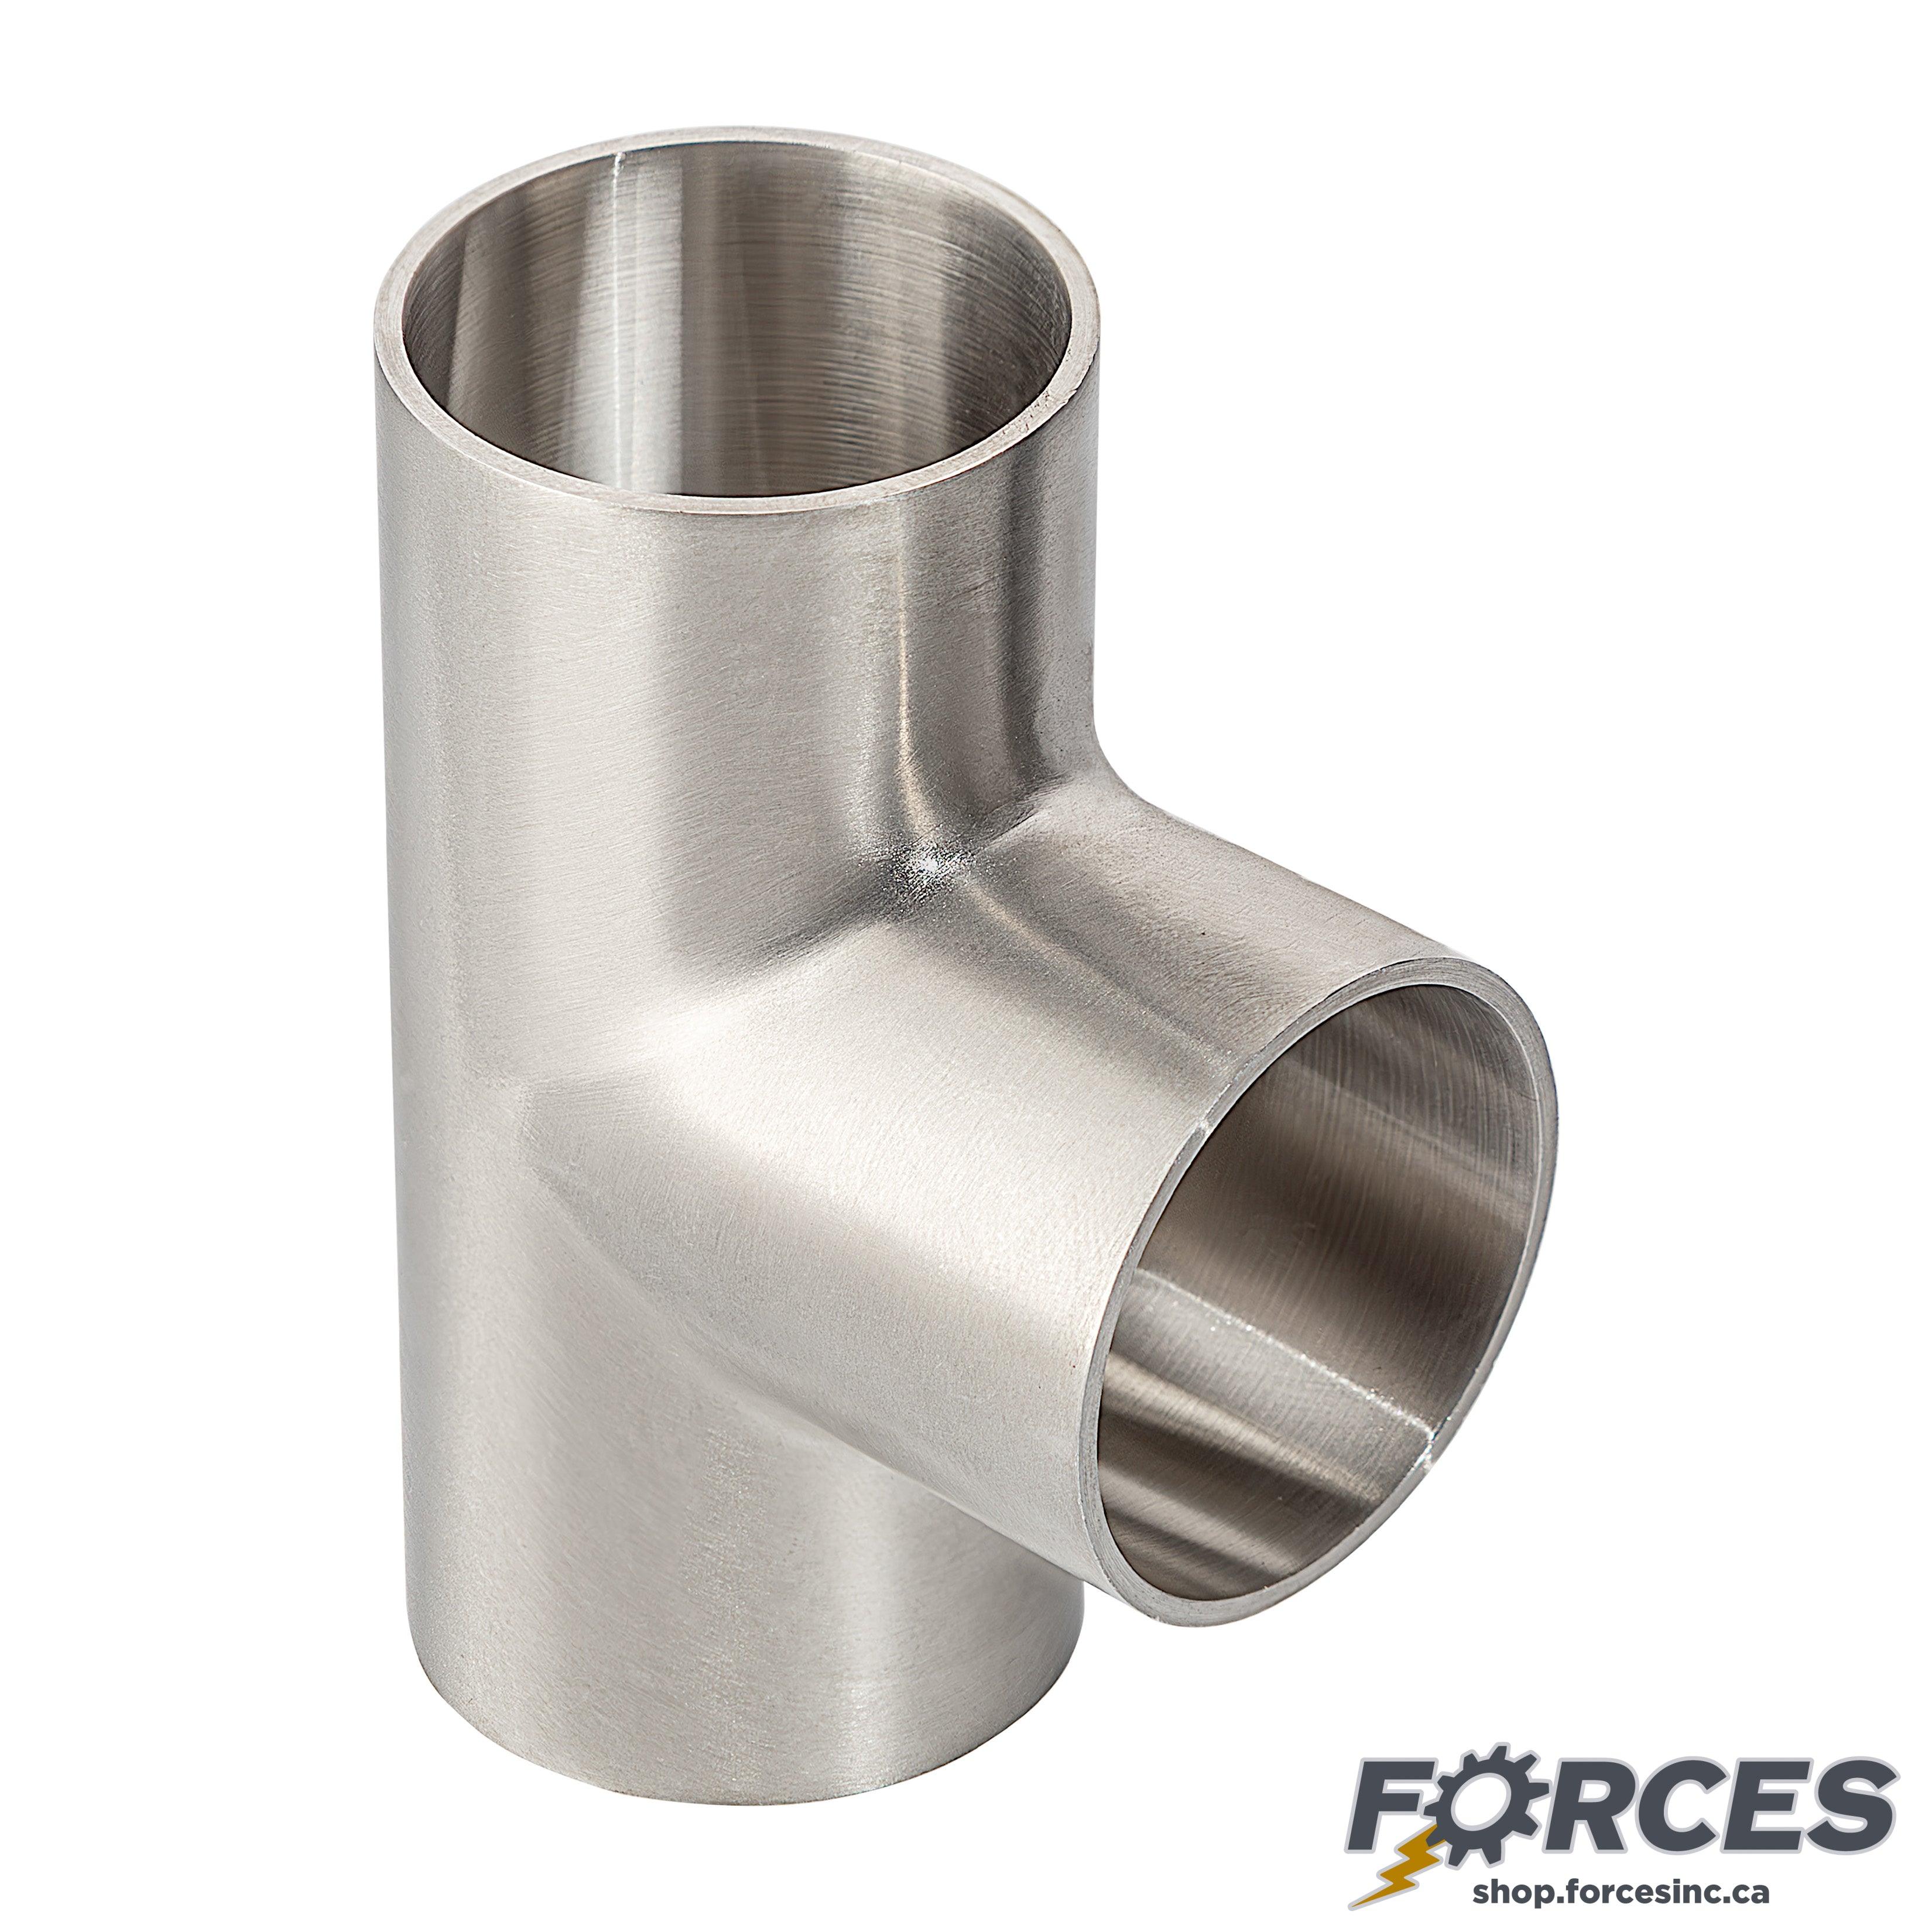 2-1/2" Butt Weld Short Tee - Stainless Steel 304 - Forces Inc